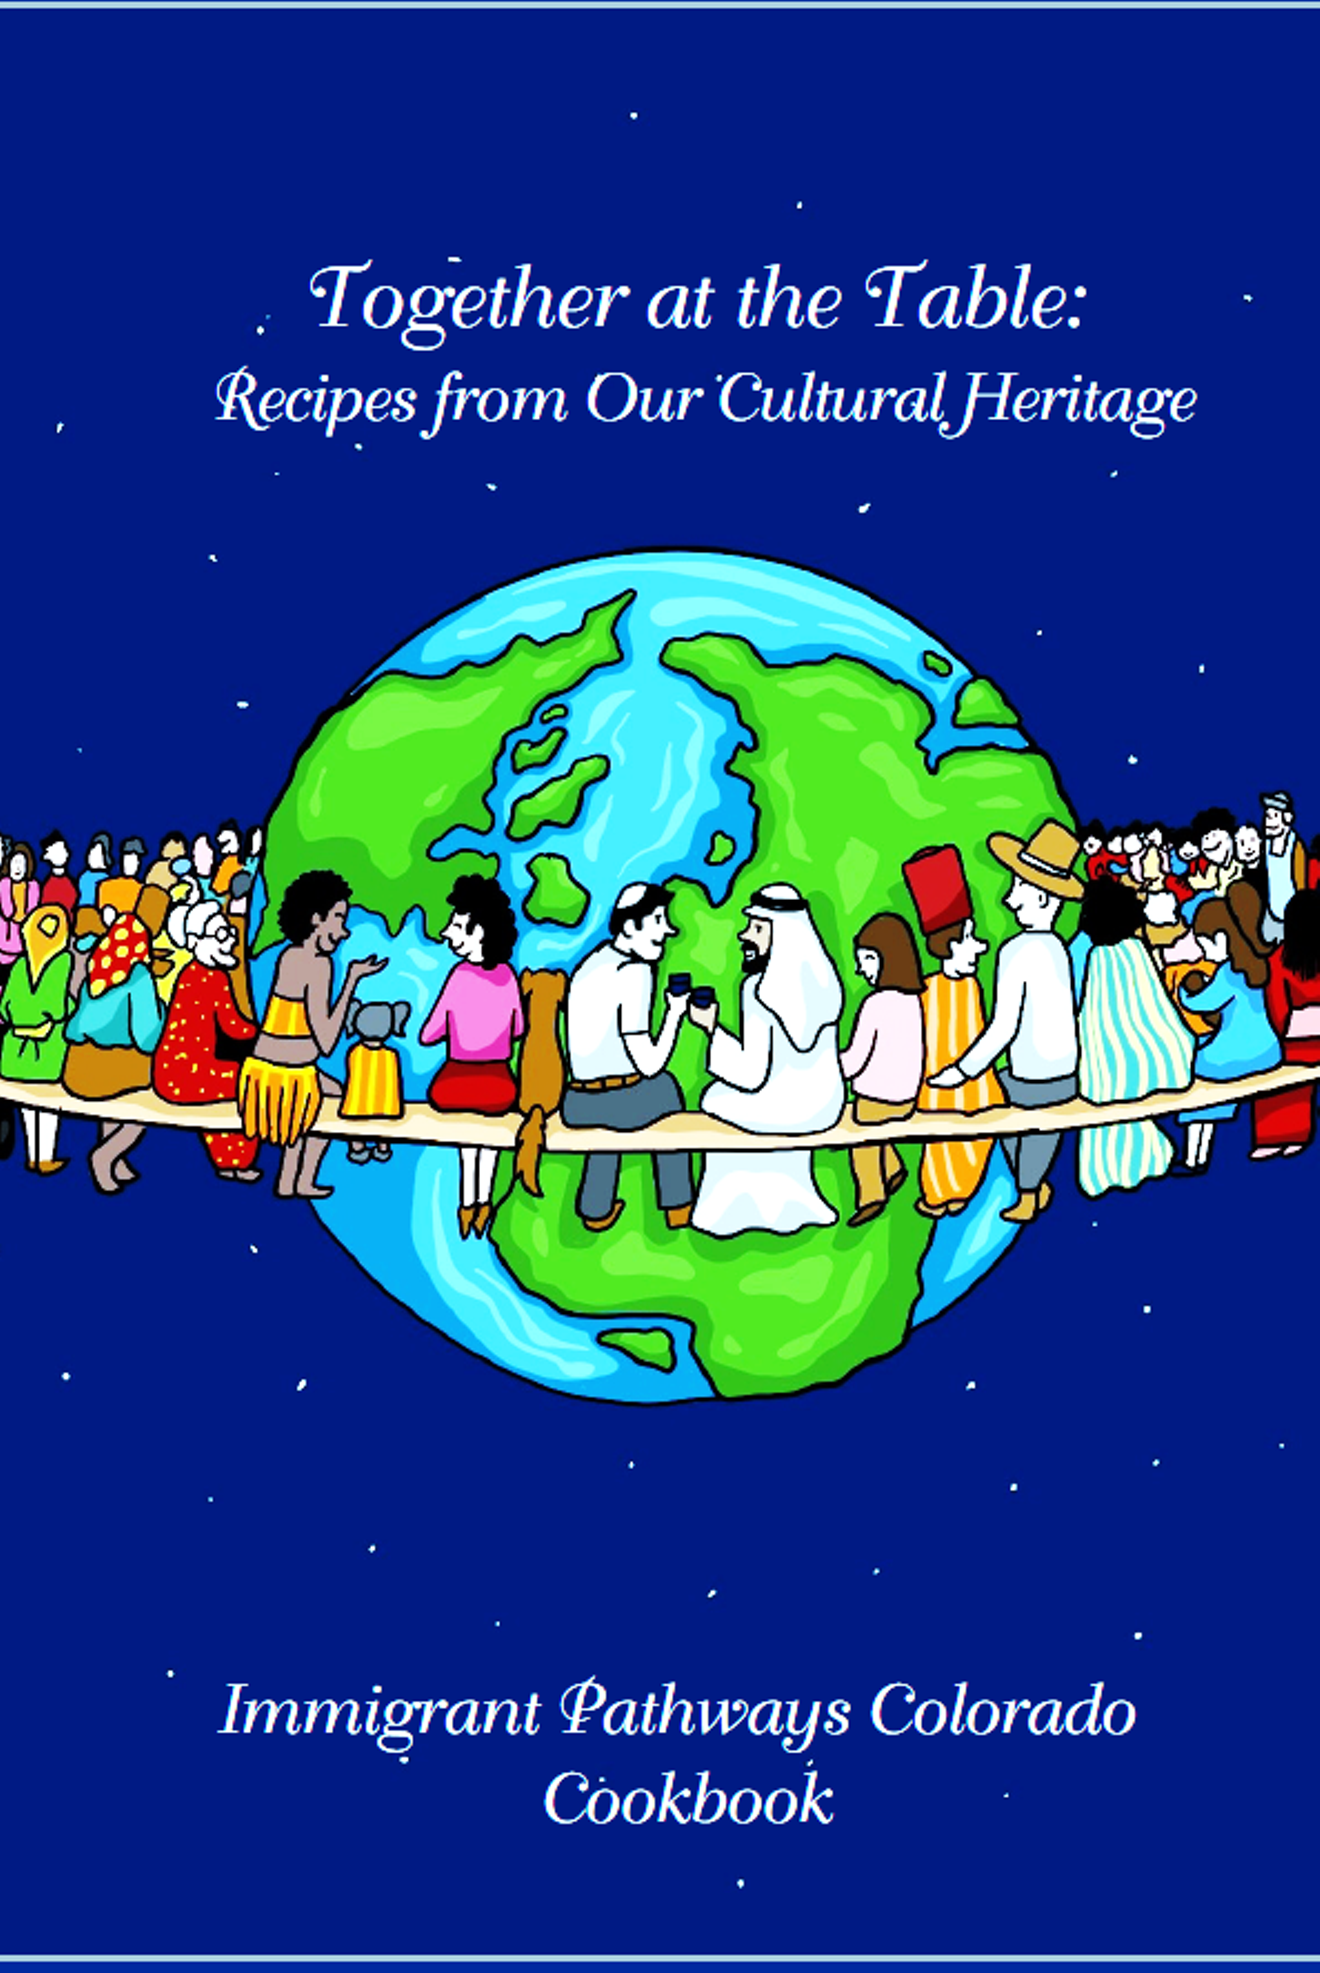 Together at the Table: Recipes From Our Cultural Heritage is a cookbook meant to celebrate the stories behind passed-down recipes.